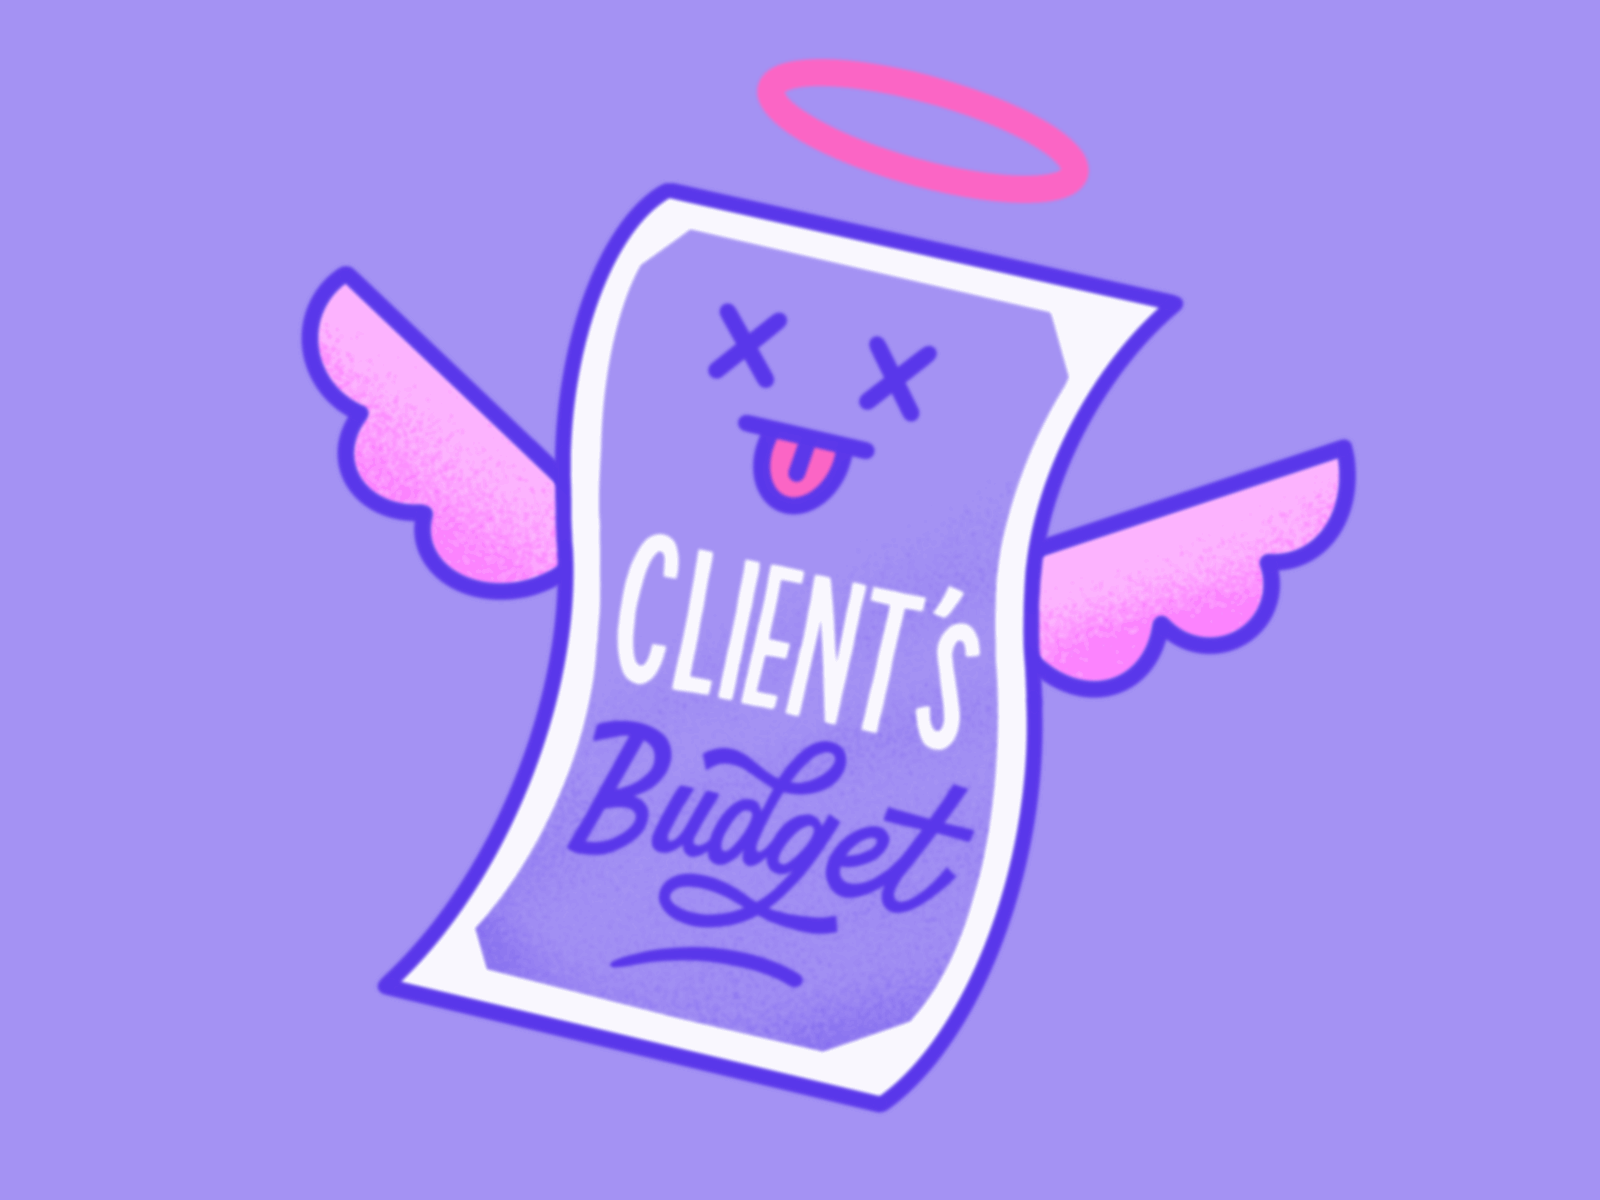 client-s-budget-by-sonia-yim-on-dribbble